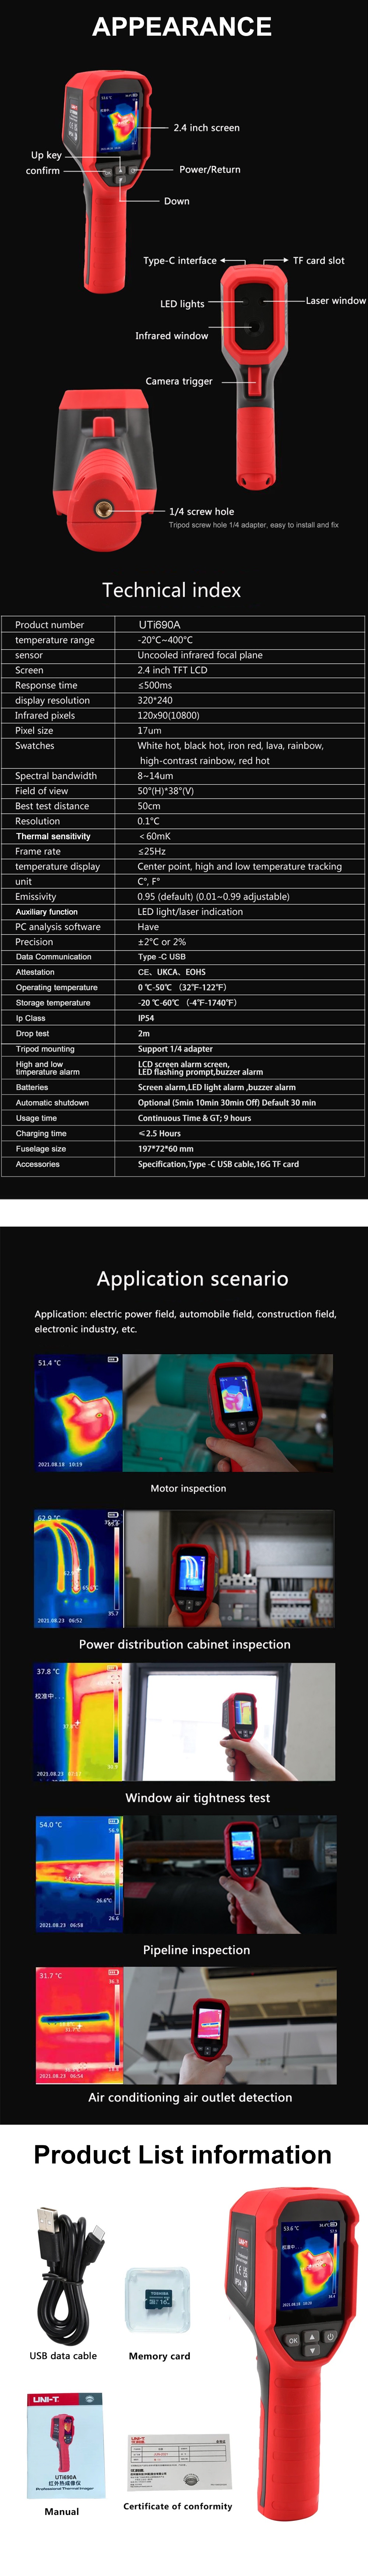 UNI-T-UTi690A-12090-Infrared-Thermal-Imager--20400-PC-Software-Analysis-Industrial-Thermal-Imaging-C-1902537-4